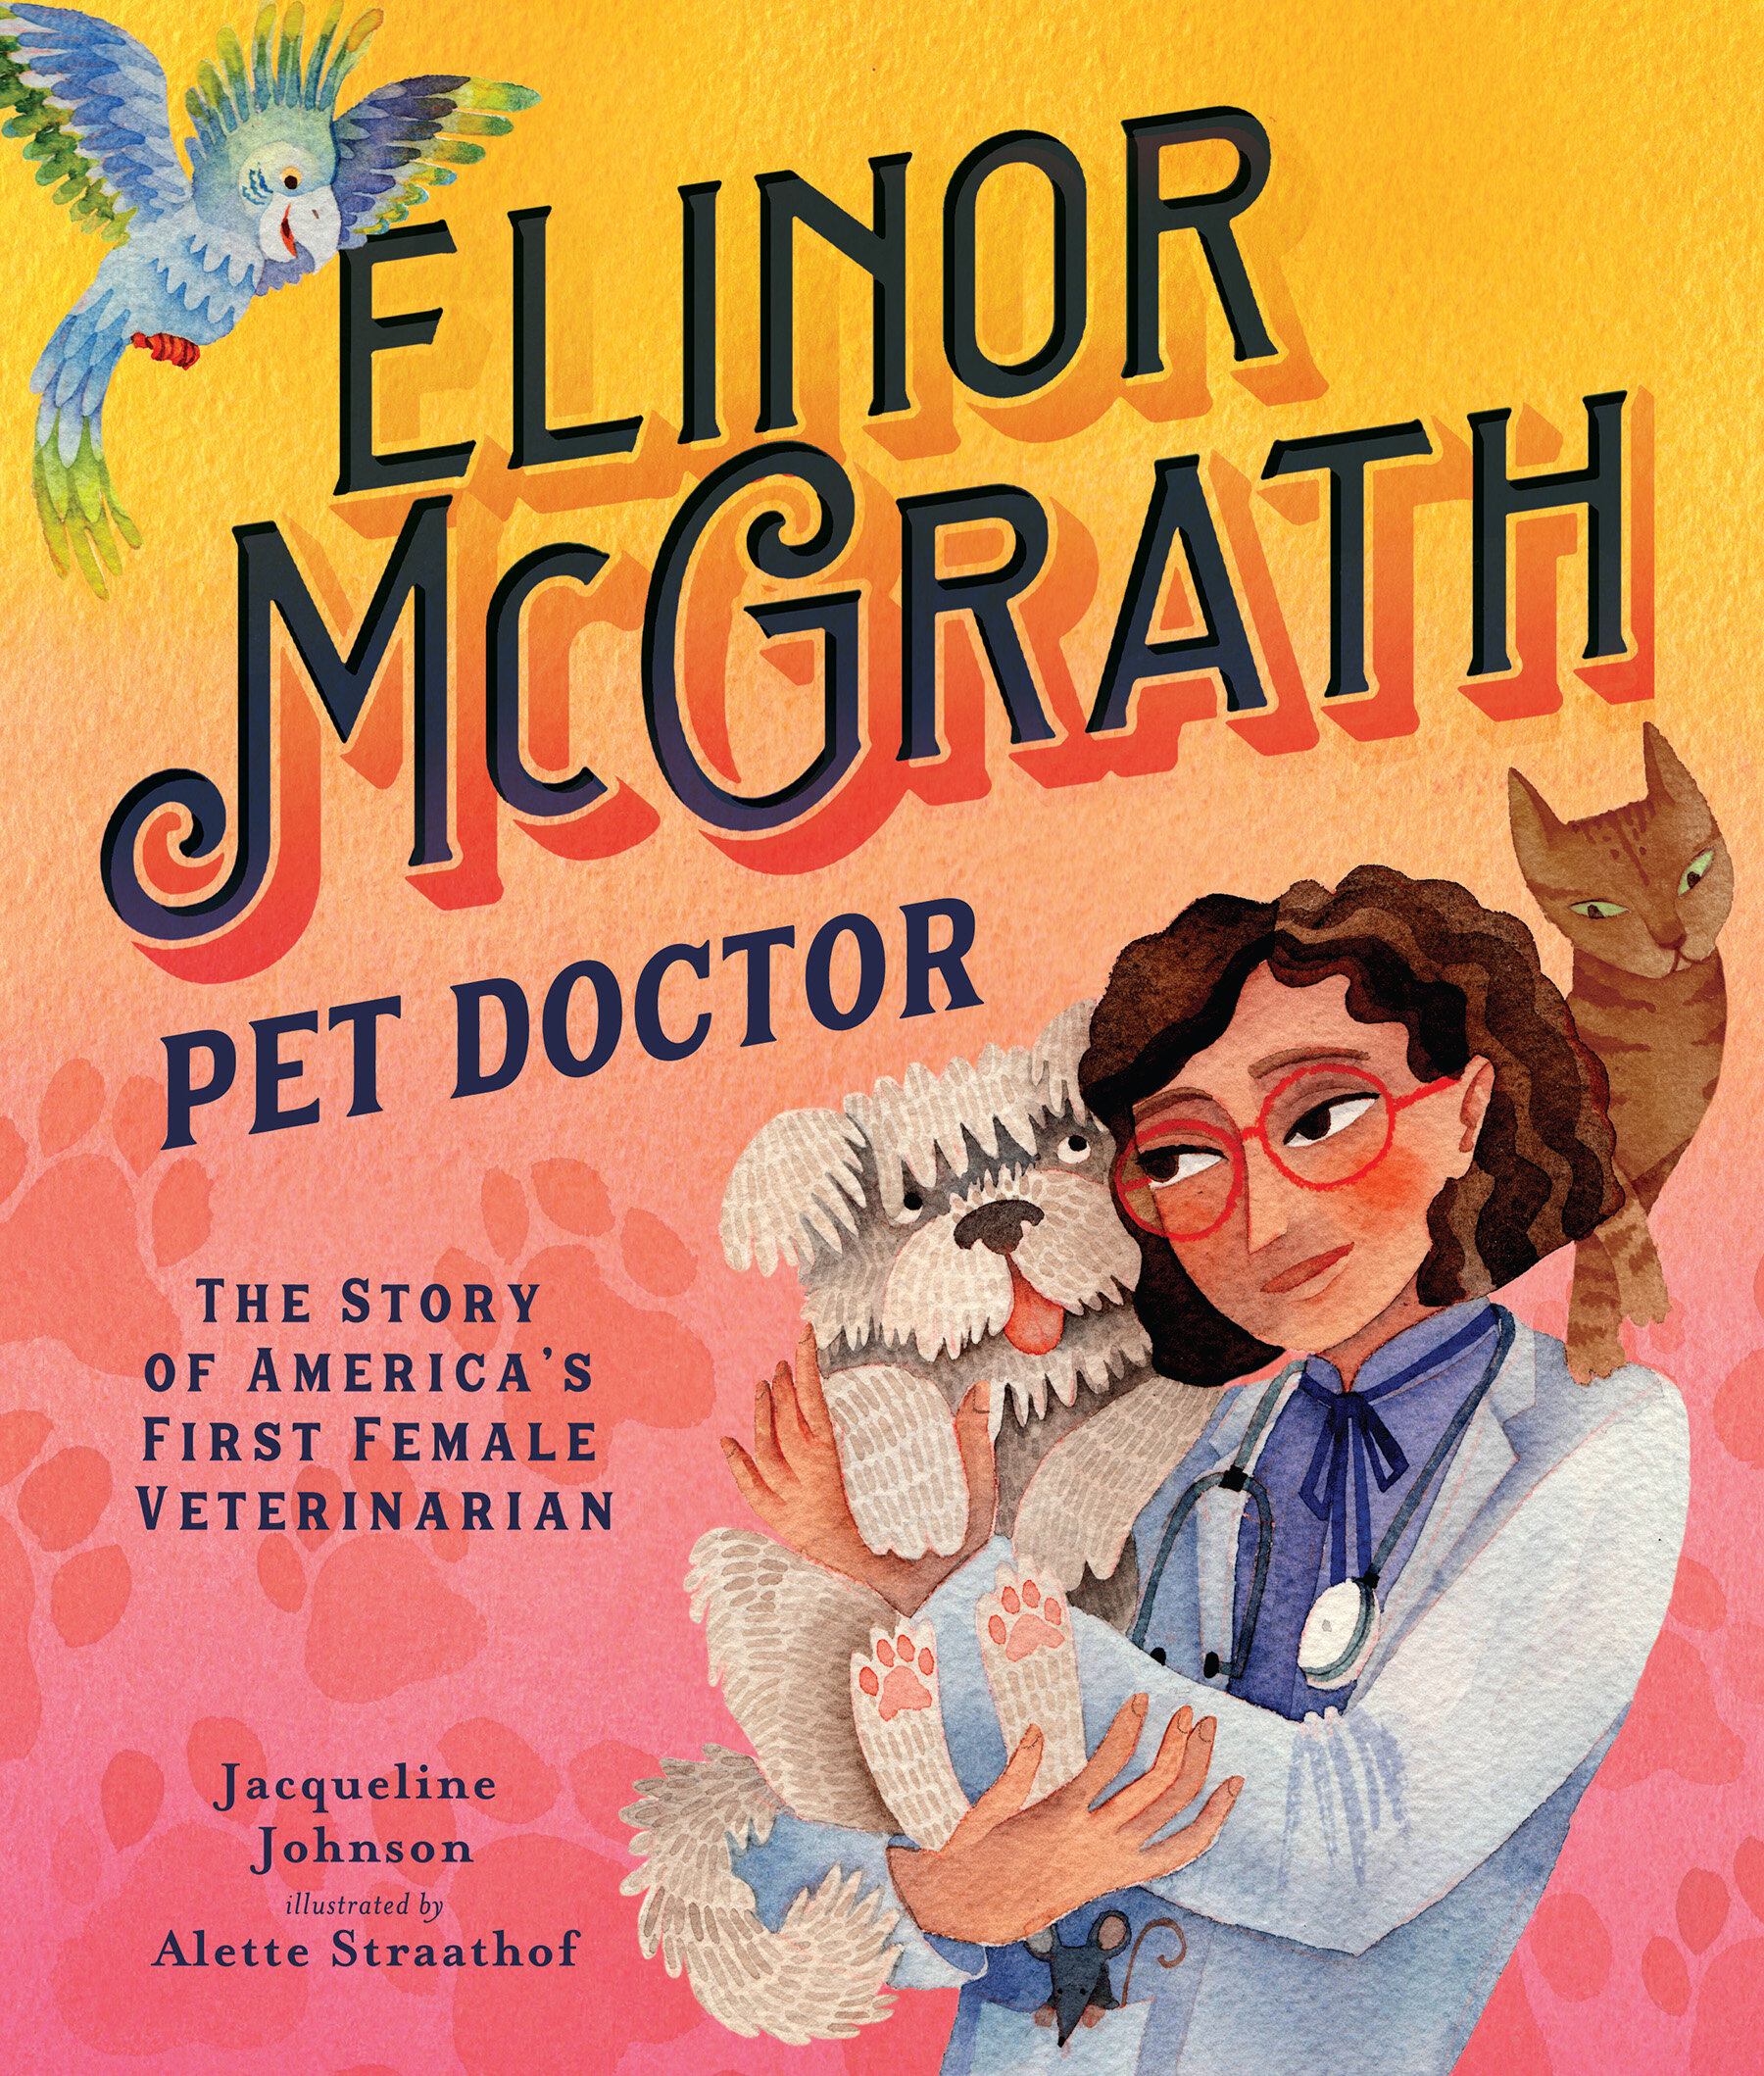 Elinor McGrath, Pet Doctor: The Story of America’s First Female Veterinarian